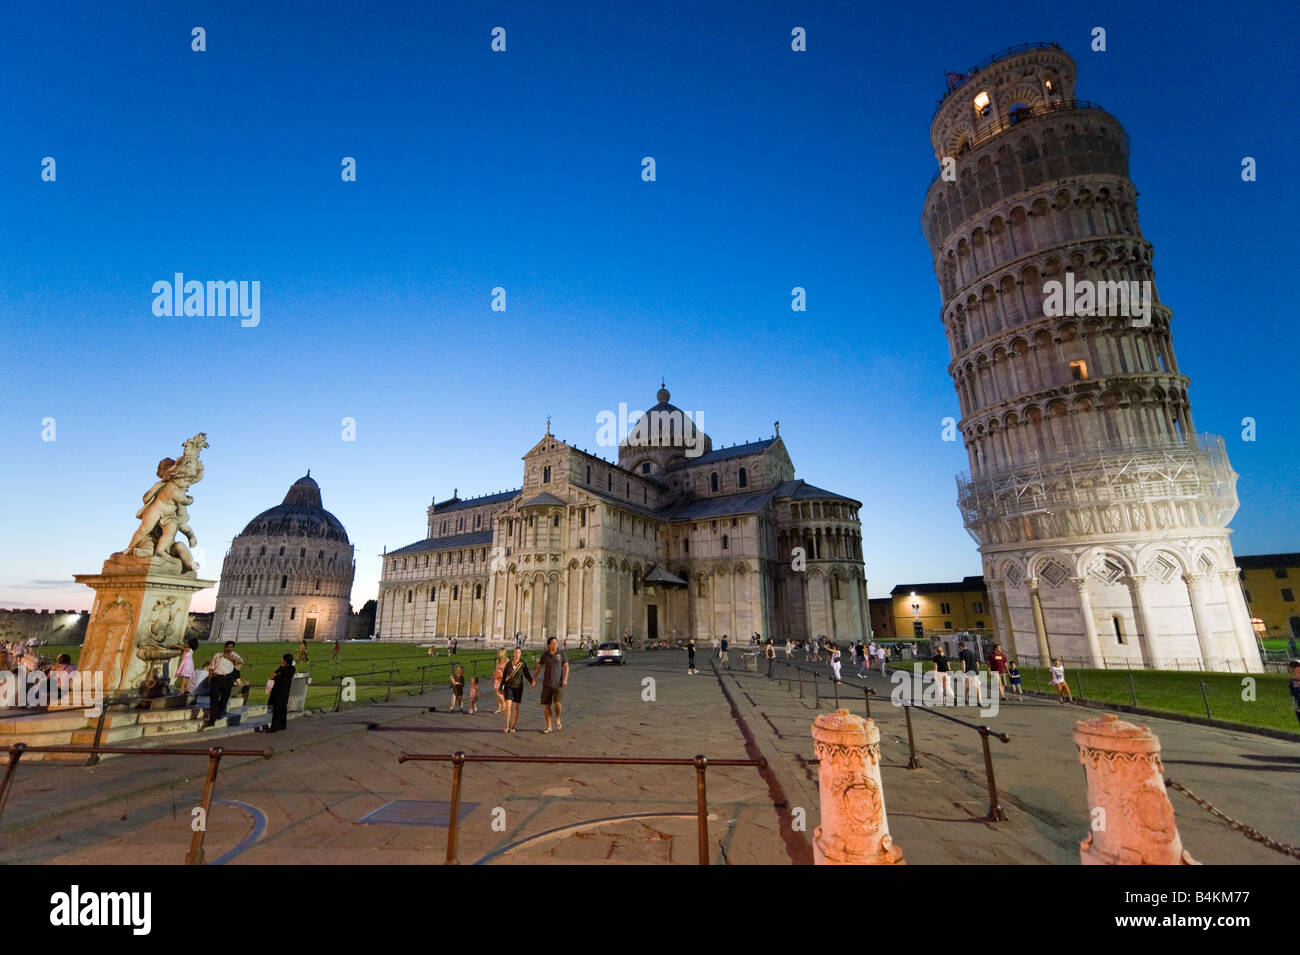 The Duomo, Baptistry and Leaning Tower at dusk, Piazza dei Miracoli, Pisa, Tuscany, Italy Stock Photo